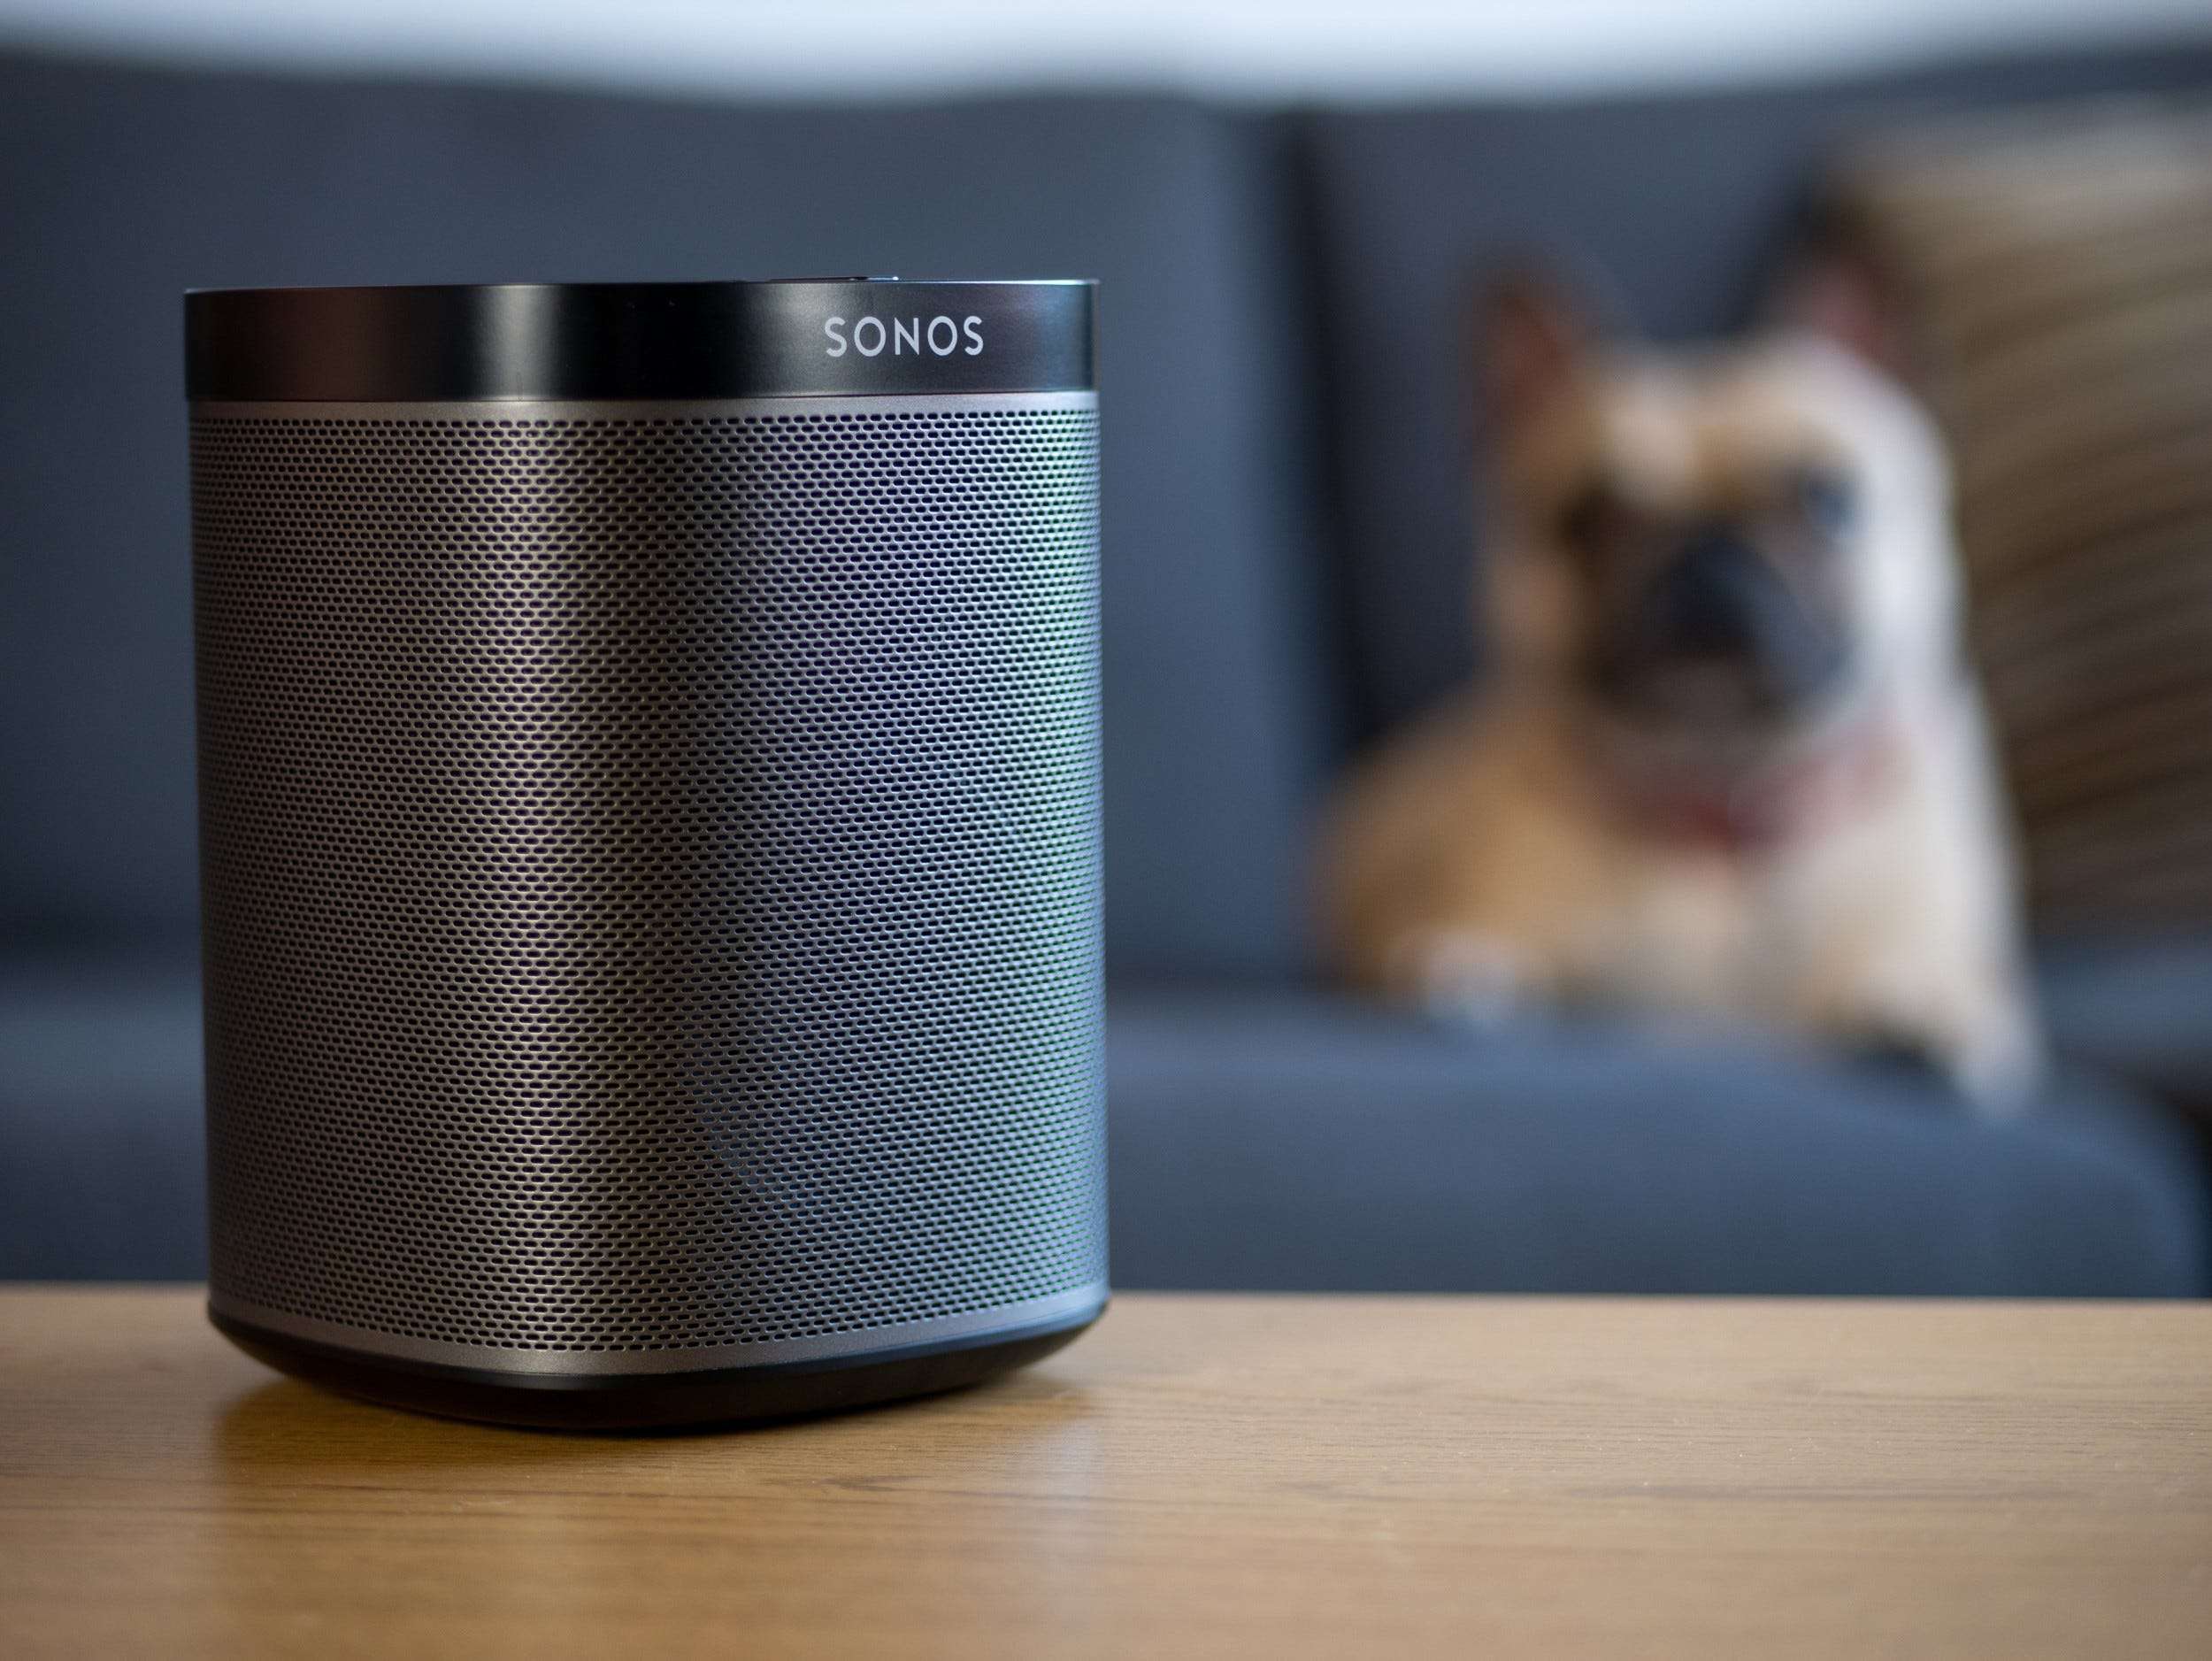 How to play your favorite Audible books on Sonos speakers using mobile device | Business Insider India